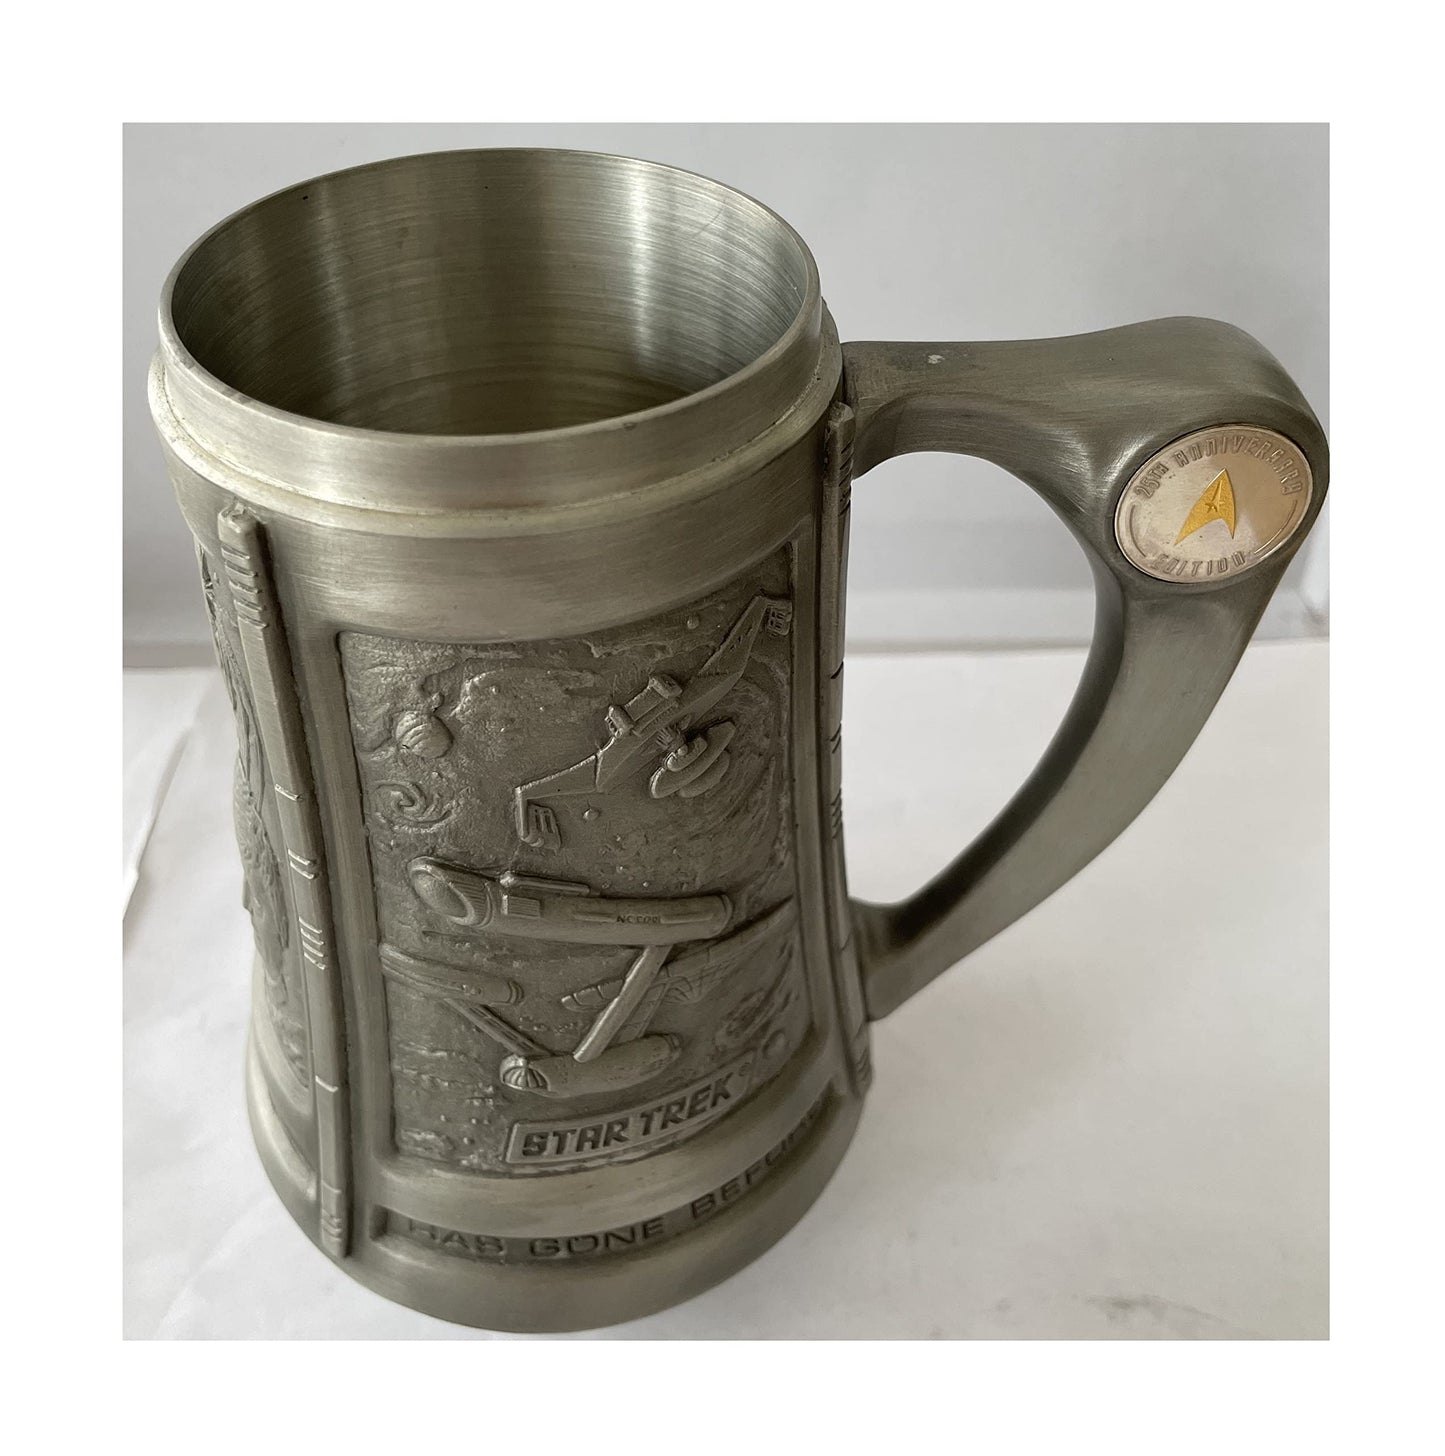 Vintage 1991 Franklin Mint - The Official Star Trek The Original Series 25th Anniversary Pewter Tankard - Shop Stock Room Find